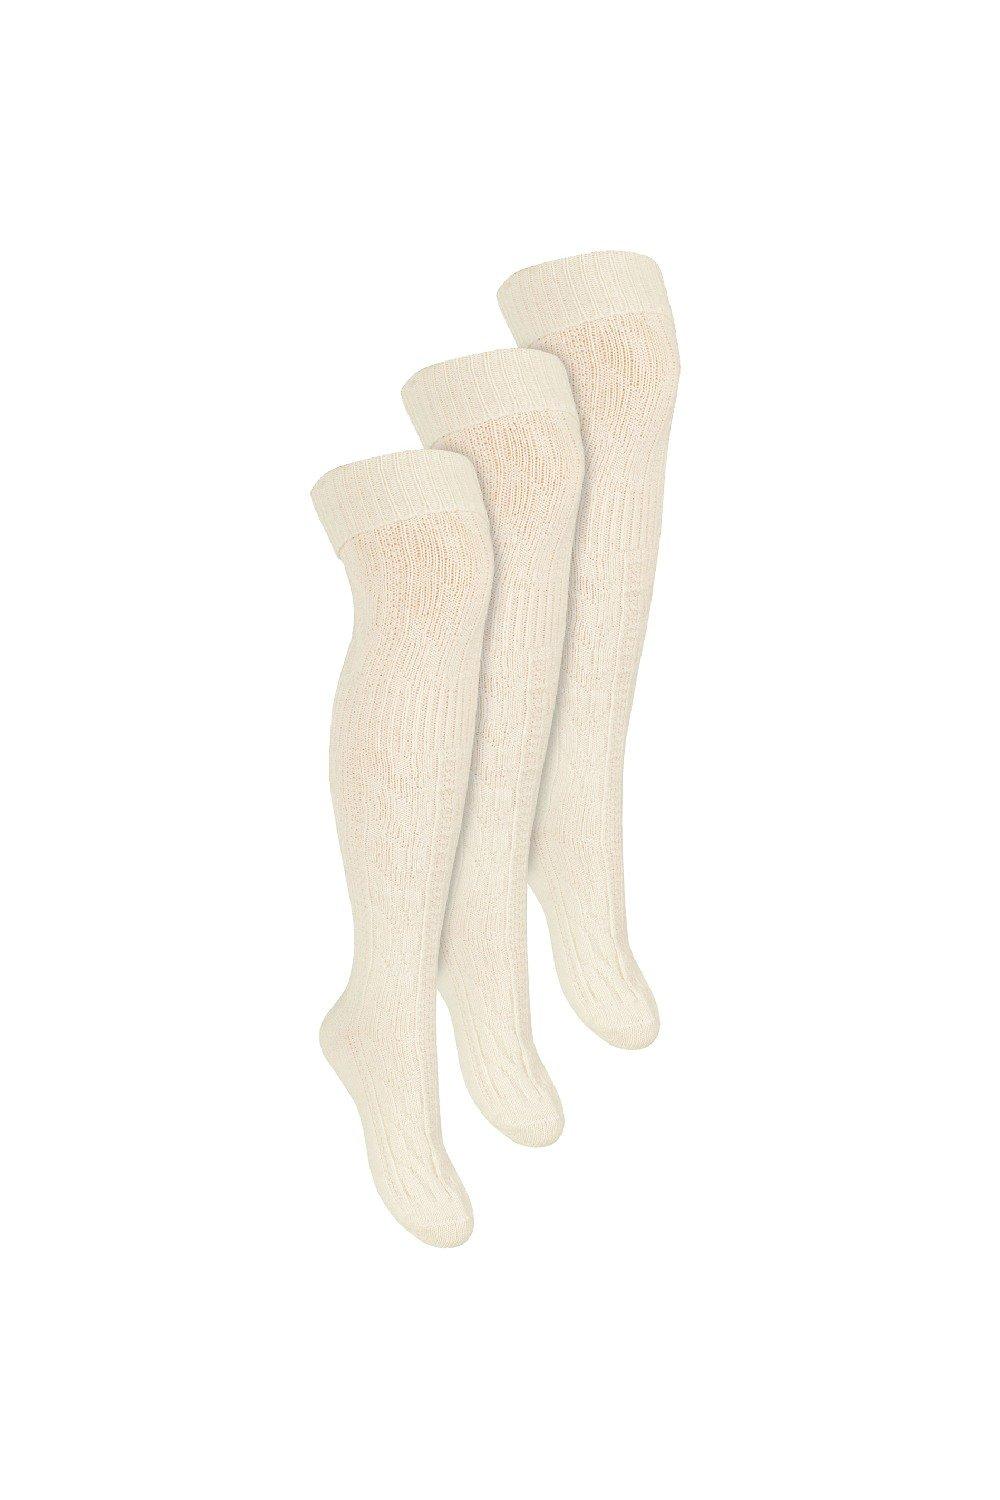 3 Pairs Extra Long Thigh High Over The Knee Wool Socks